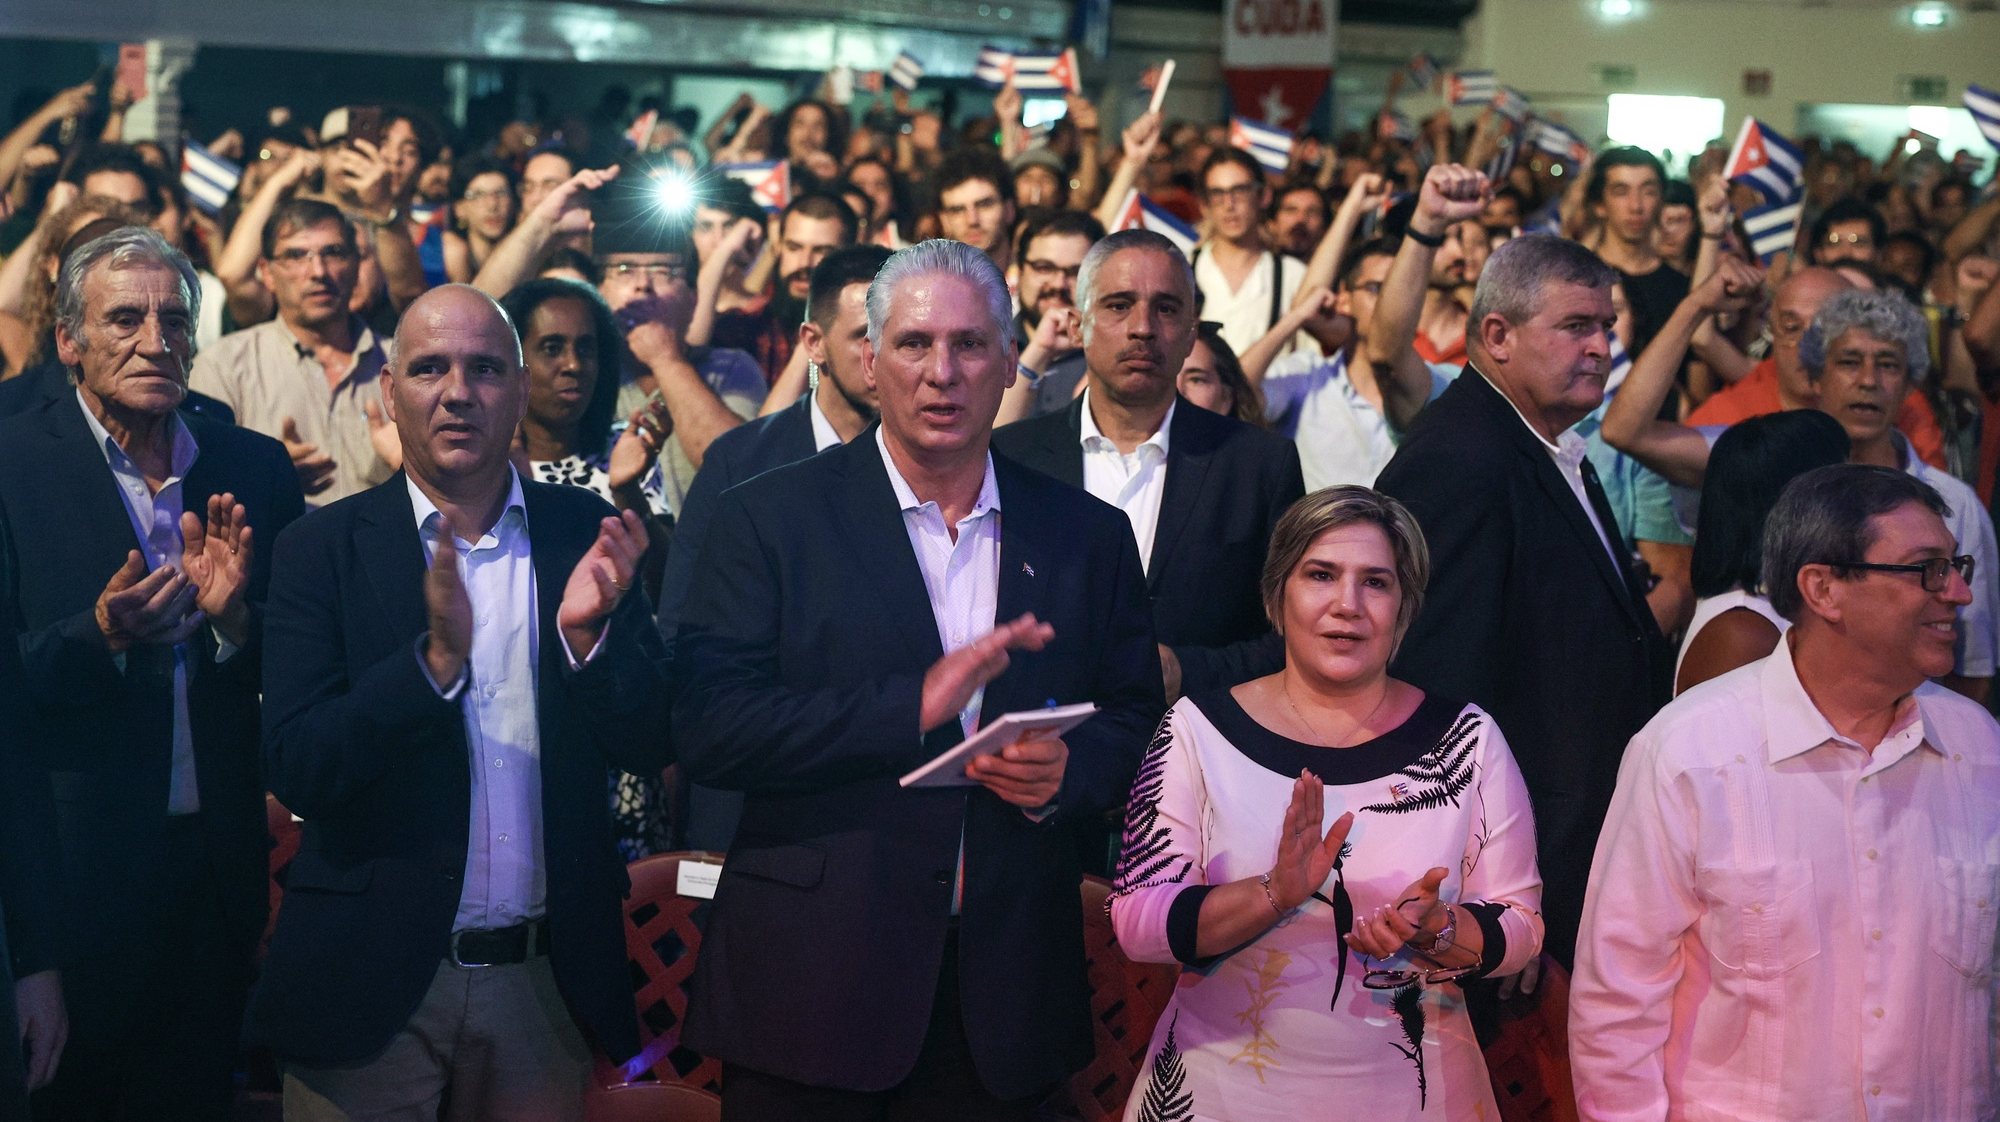 Cuba&#039;s President Miguel Diaz-Canel (C) flanked by the secretary-general of the Portuguese Communist Party (PCP), Paulo Raimundo (2-L) and the party&#039;s former secretary-general, Jeronimo de Sousa (L), during the Solidarity act &quot;Together for Cuba&quot; in Lisbon, Portugal, 15 July 2023. The President of Cuba, Miguel Diaz-Canel is in Portugal at the invitation of Portuguese President Marcelo Rebelo de Sousa. ANTONIO COTRIM/LUSA